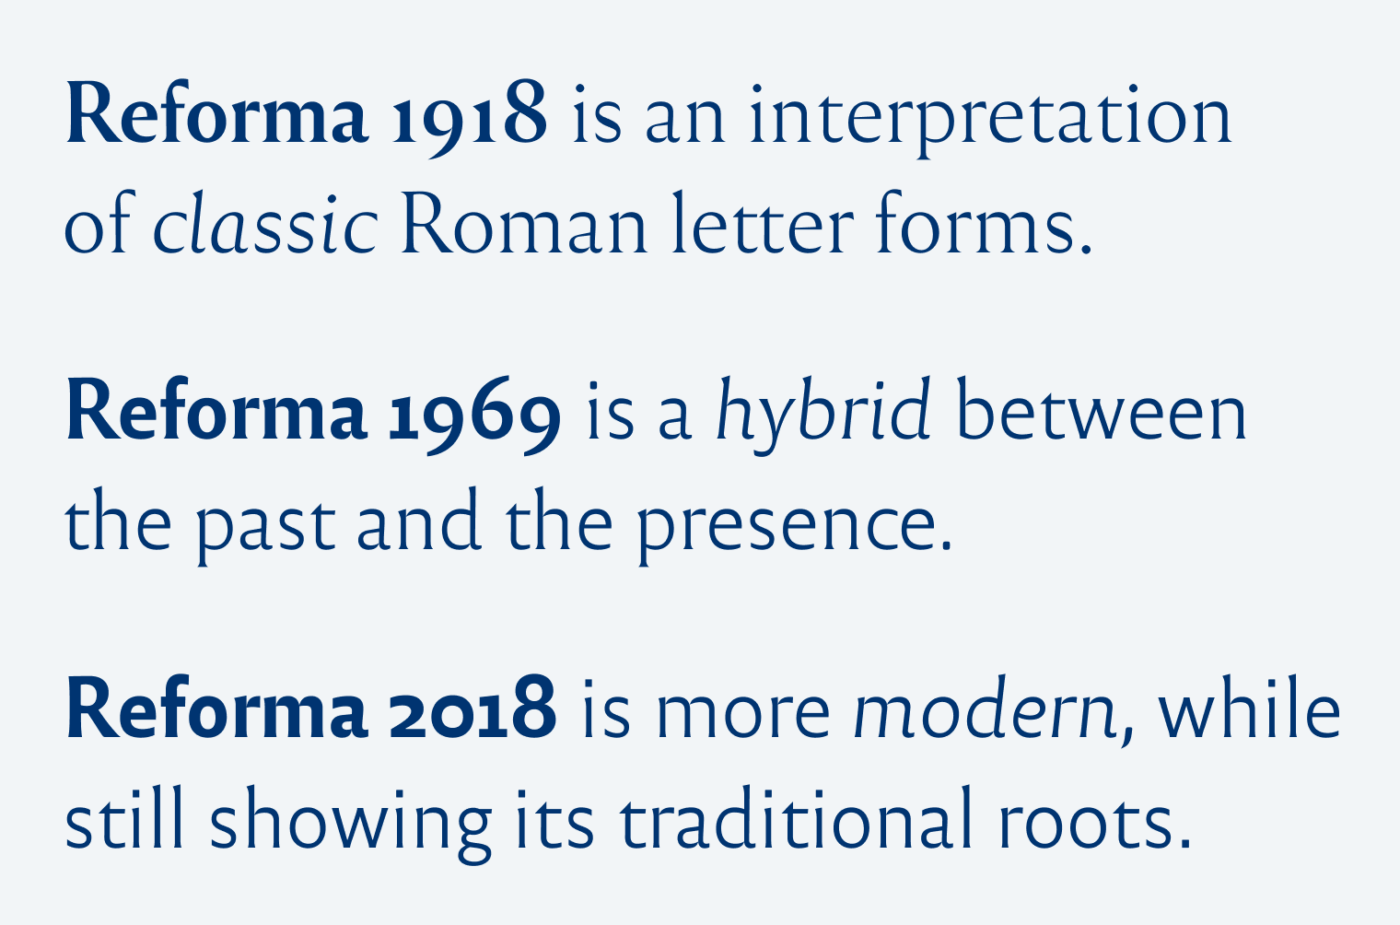 Reforma 1918 is an interpretation of classic Roman letter forms. Reforma 1969 is a hybrid between the past and the presence. Reforma 2018 is more modern, while still showing its traditional roots.